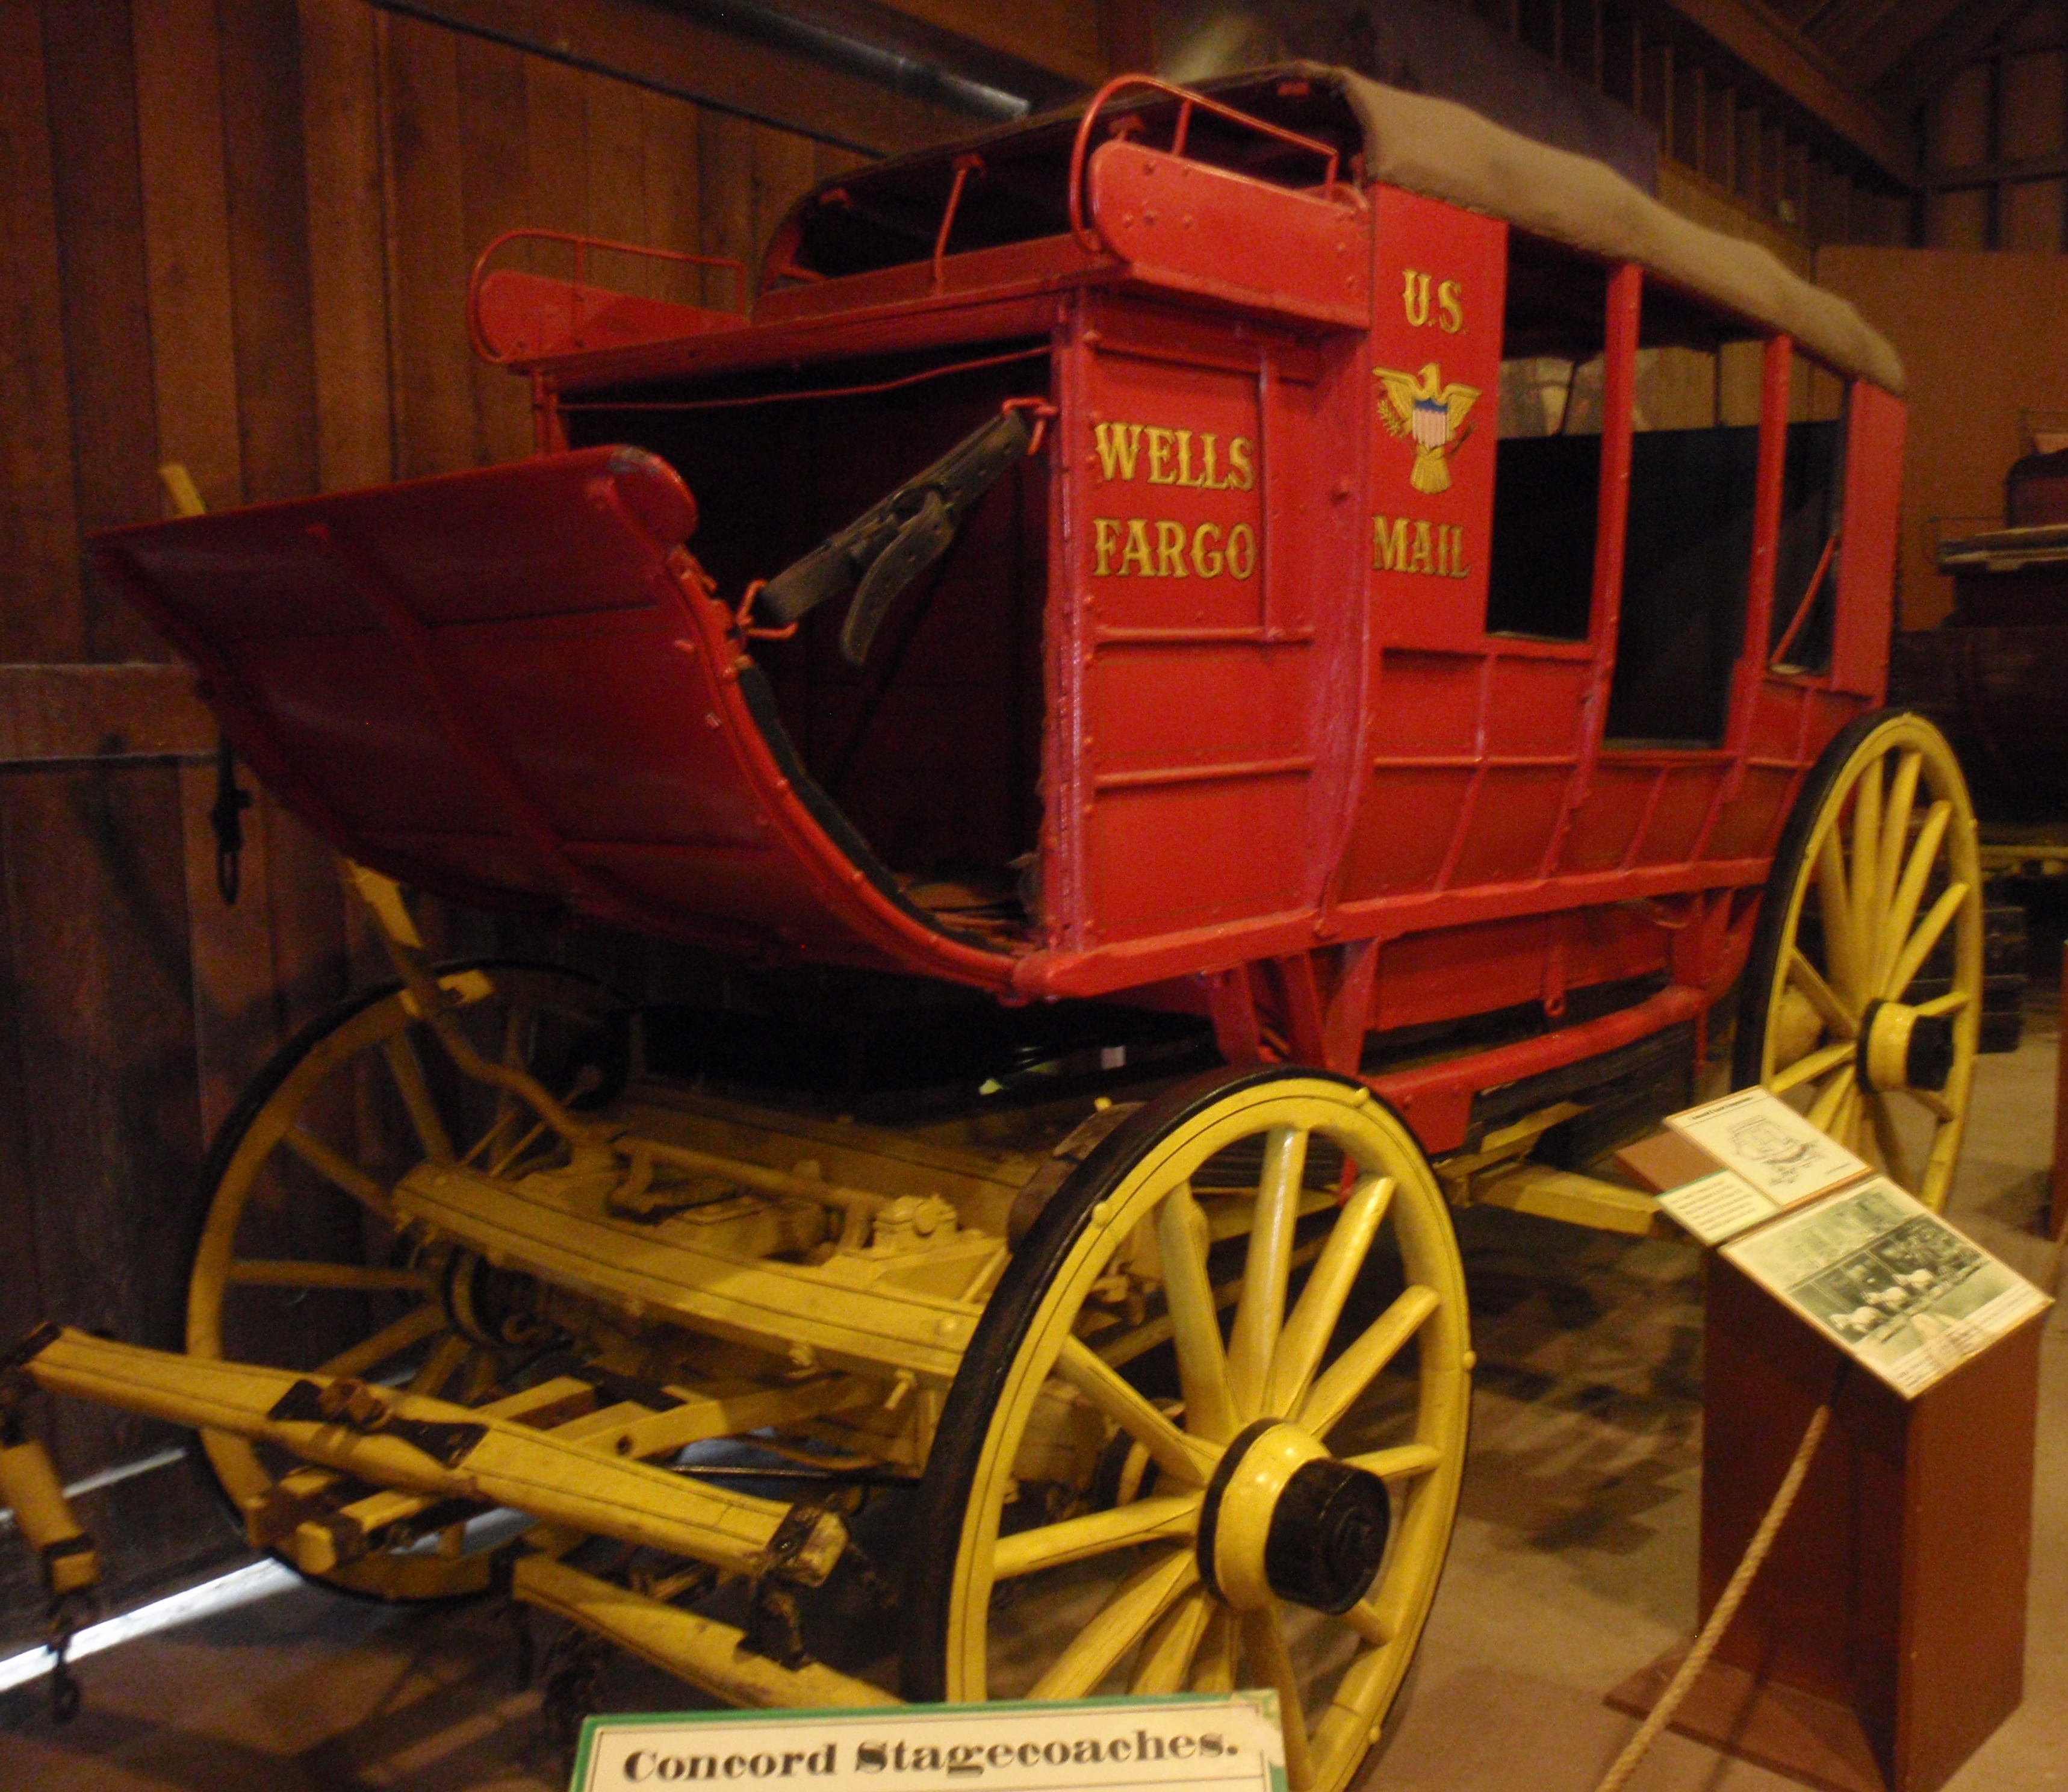 Wells Fargo 'mud wagon' at Seely Stable museum in San Diego' Old Town state park. Photo by James Ulvog.